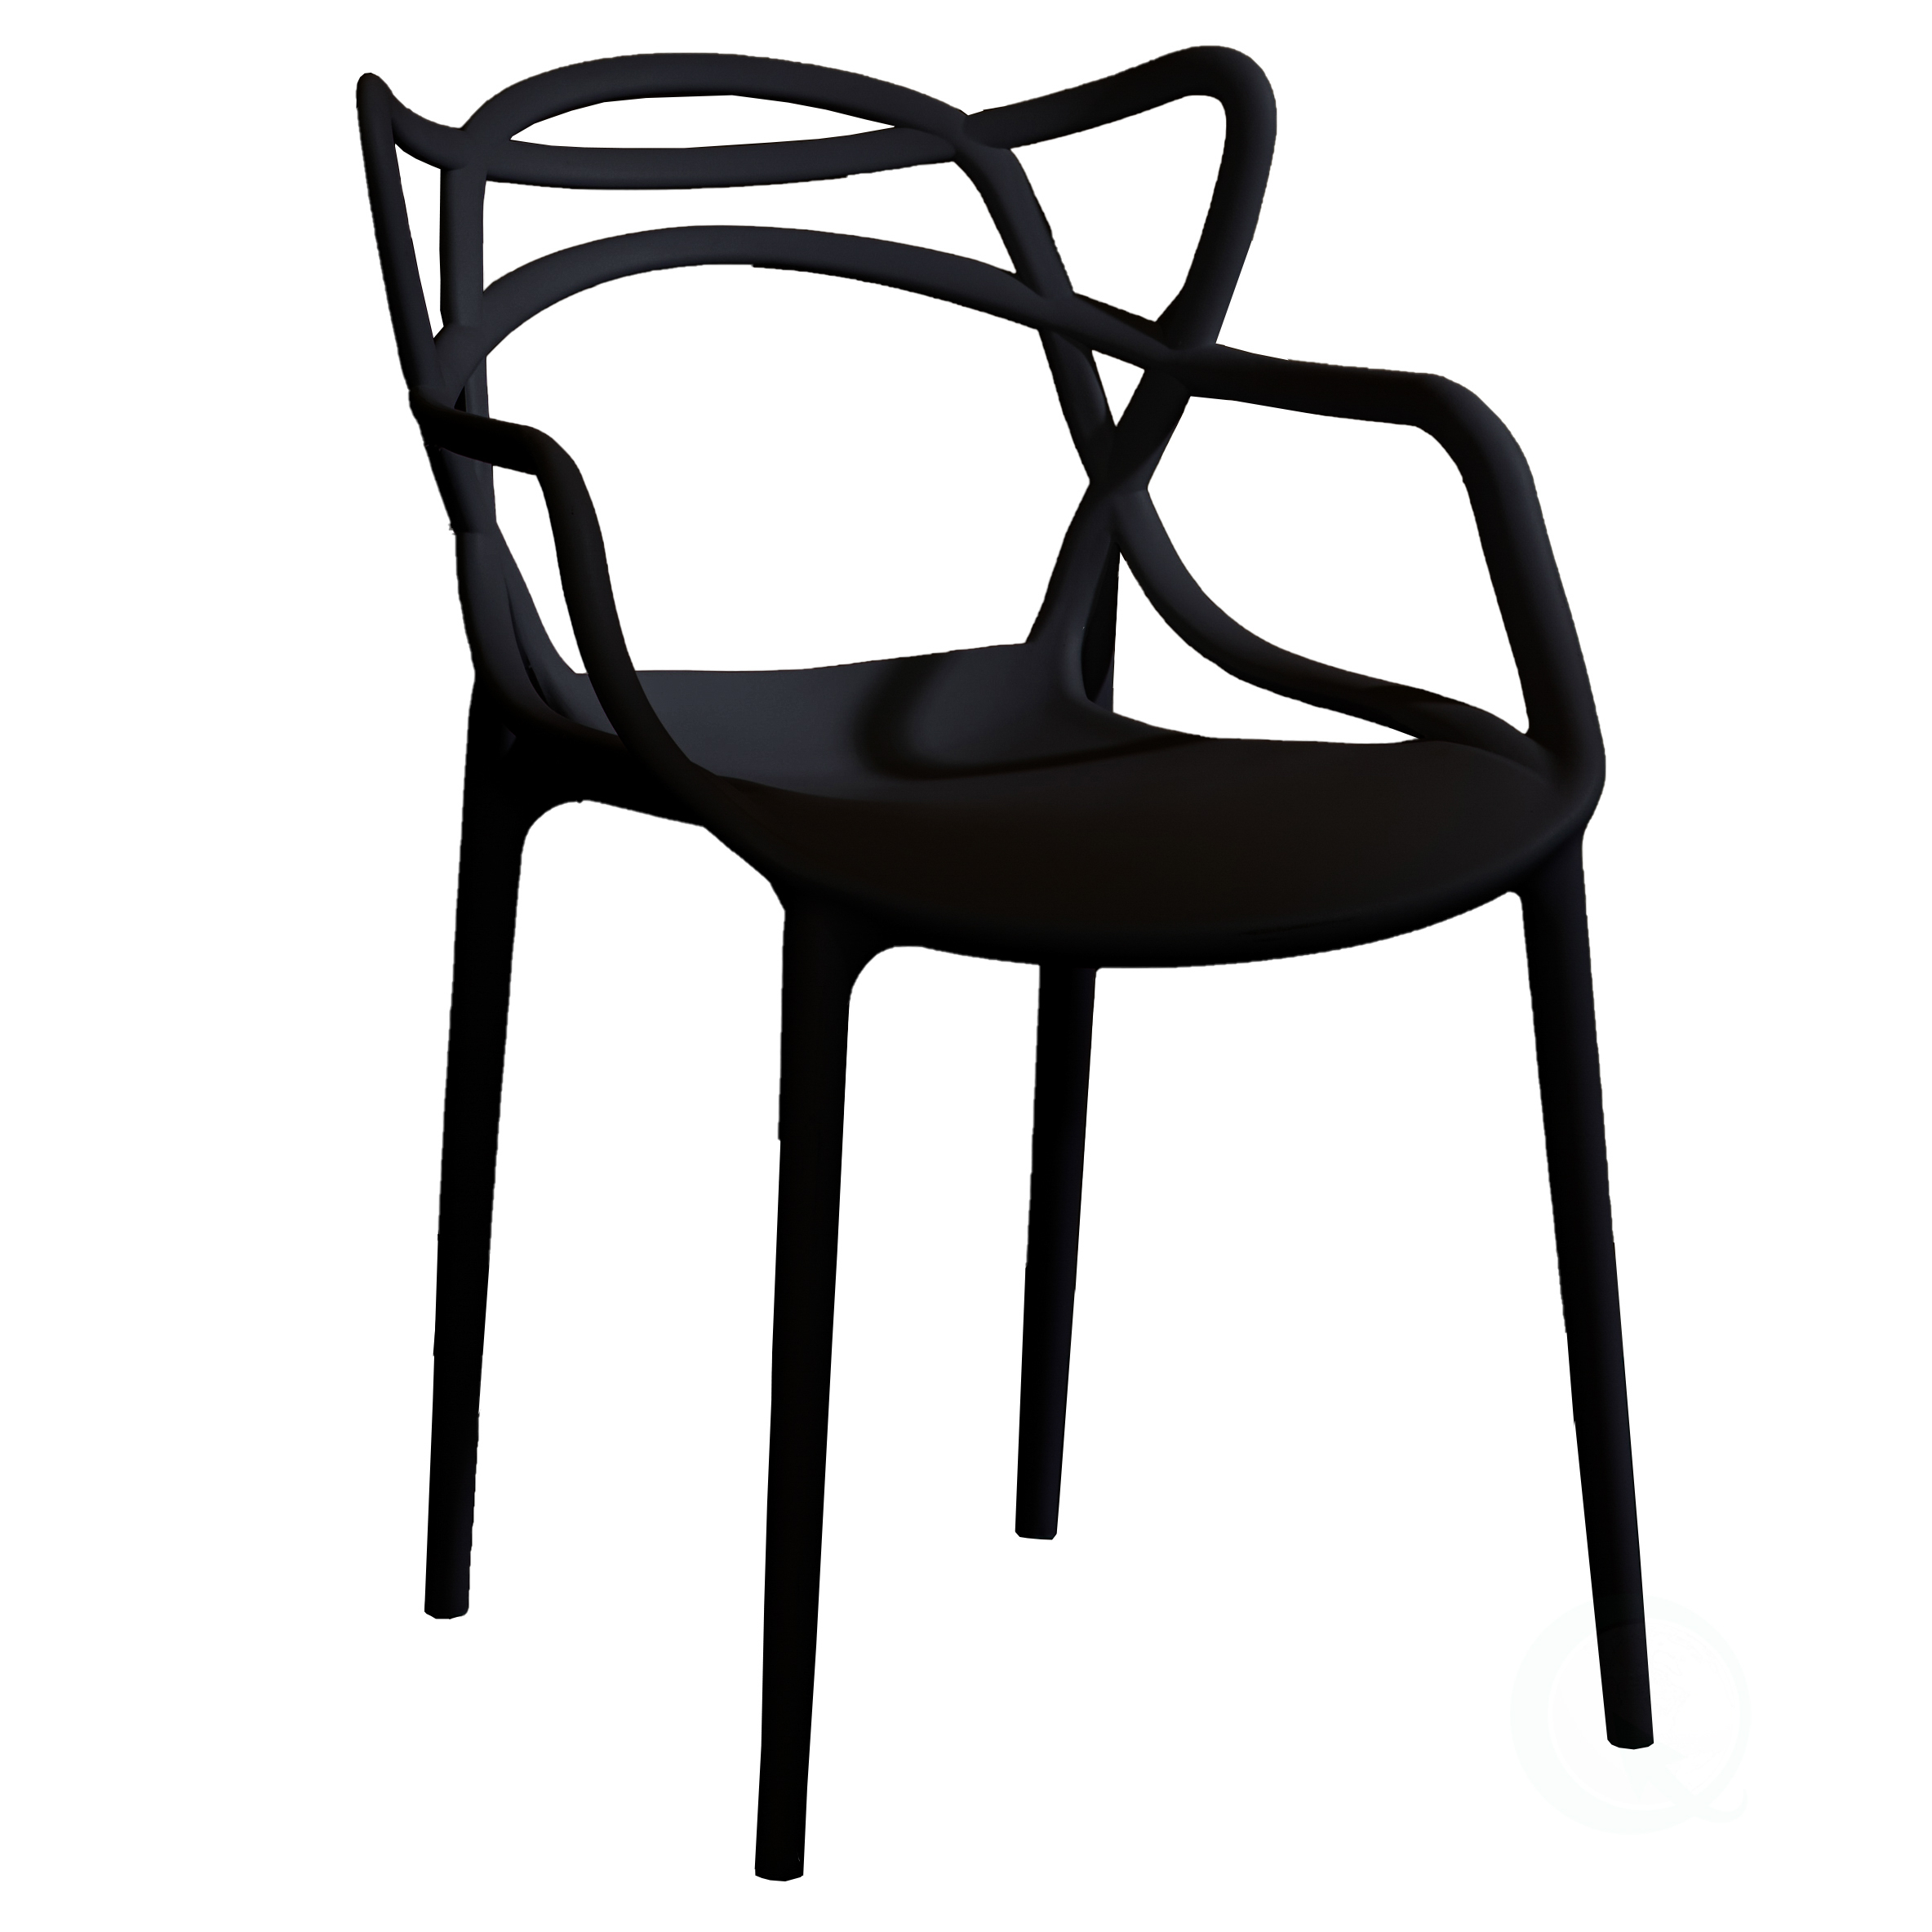 Mid-Century Modern Style Stackable Plastic Molded Arm Chair With Entangled Open Back - Black Set Of 4